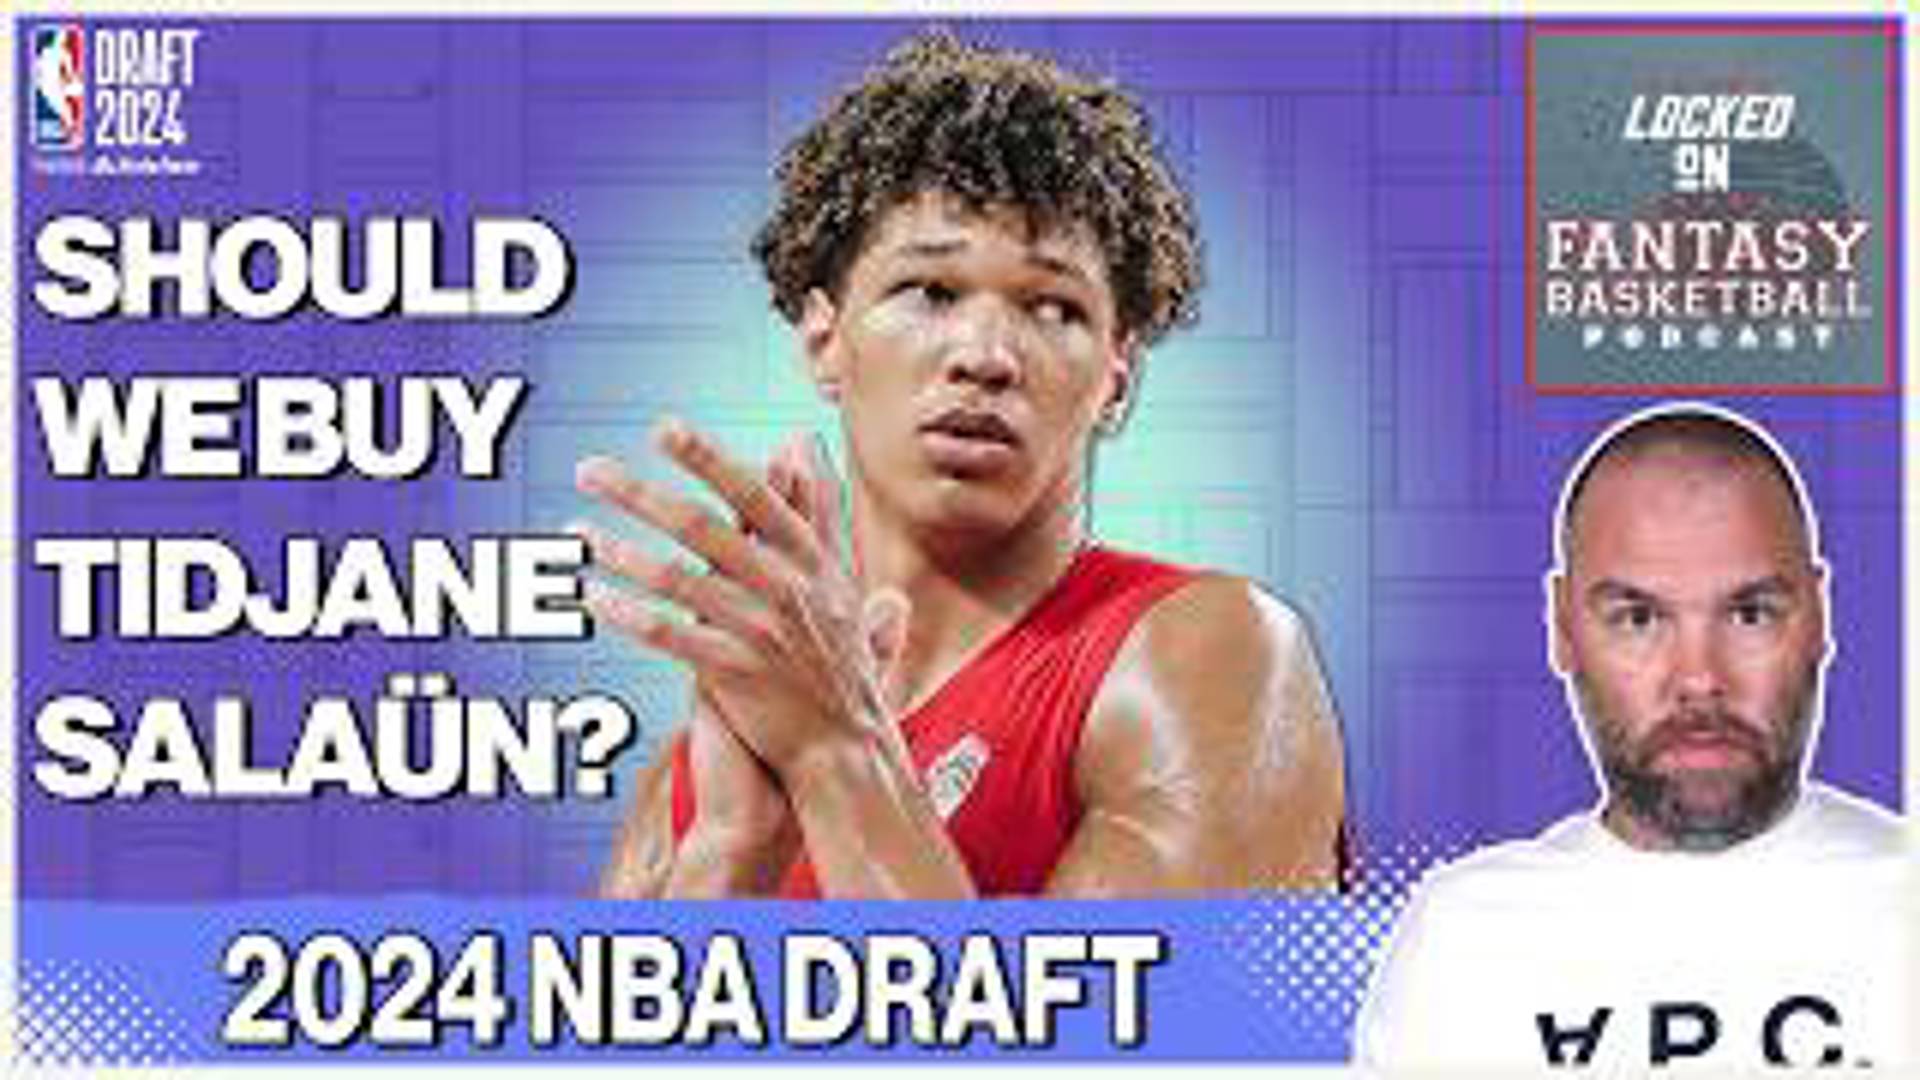 In today's episode of the Locked On Fantasy Basketball podcast, I dive deep into six exciting prospects for the 2024 NBA Draft.